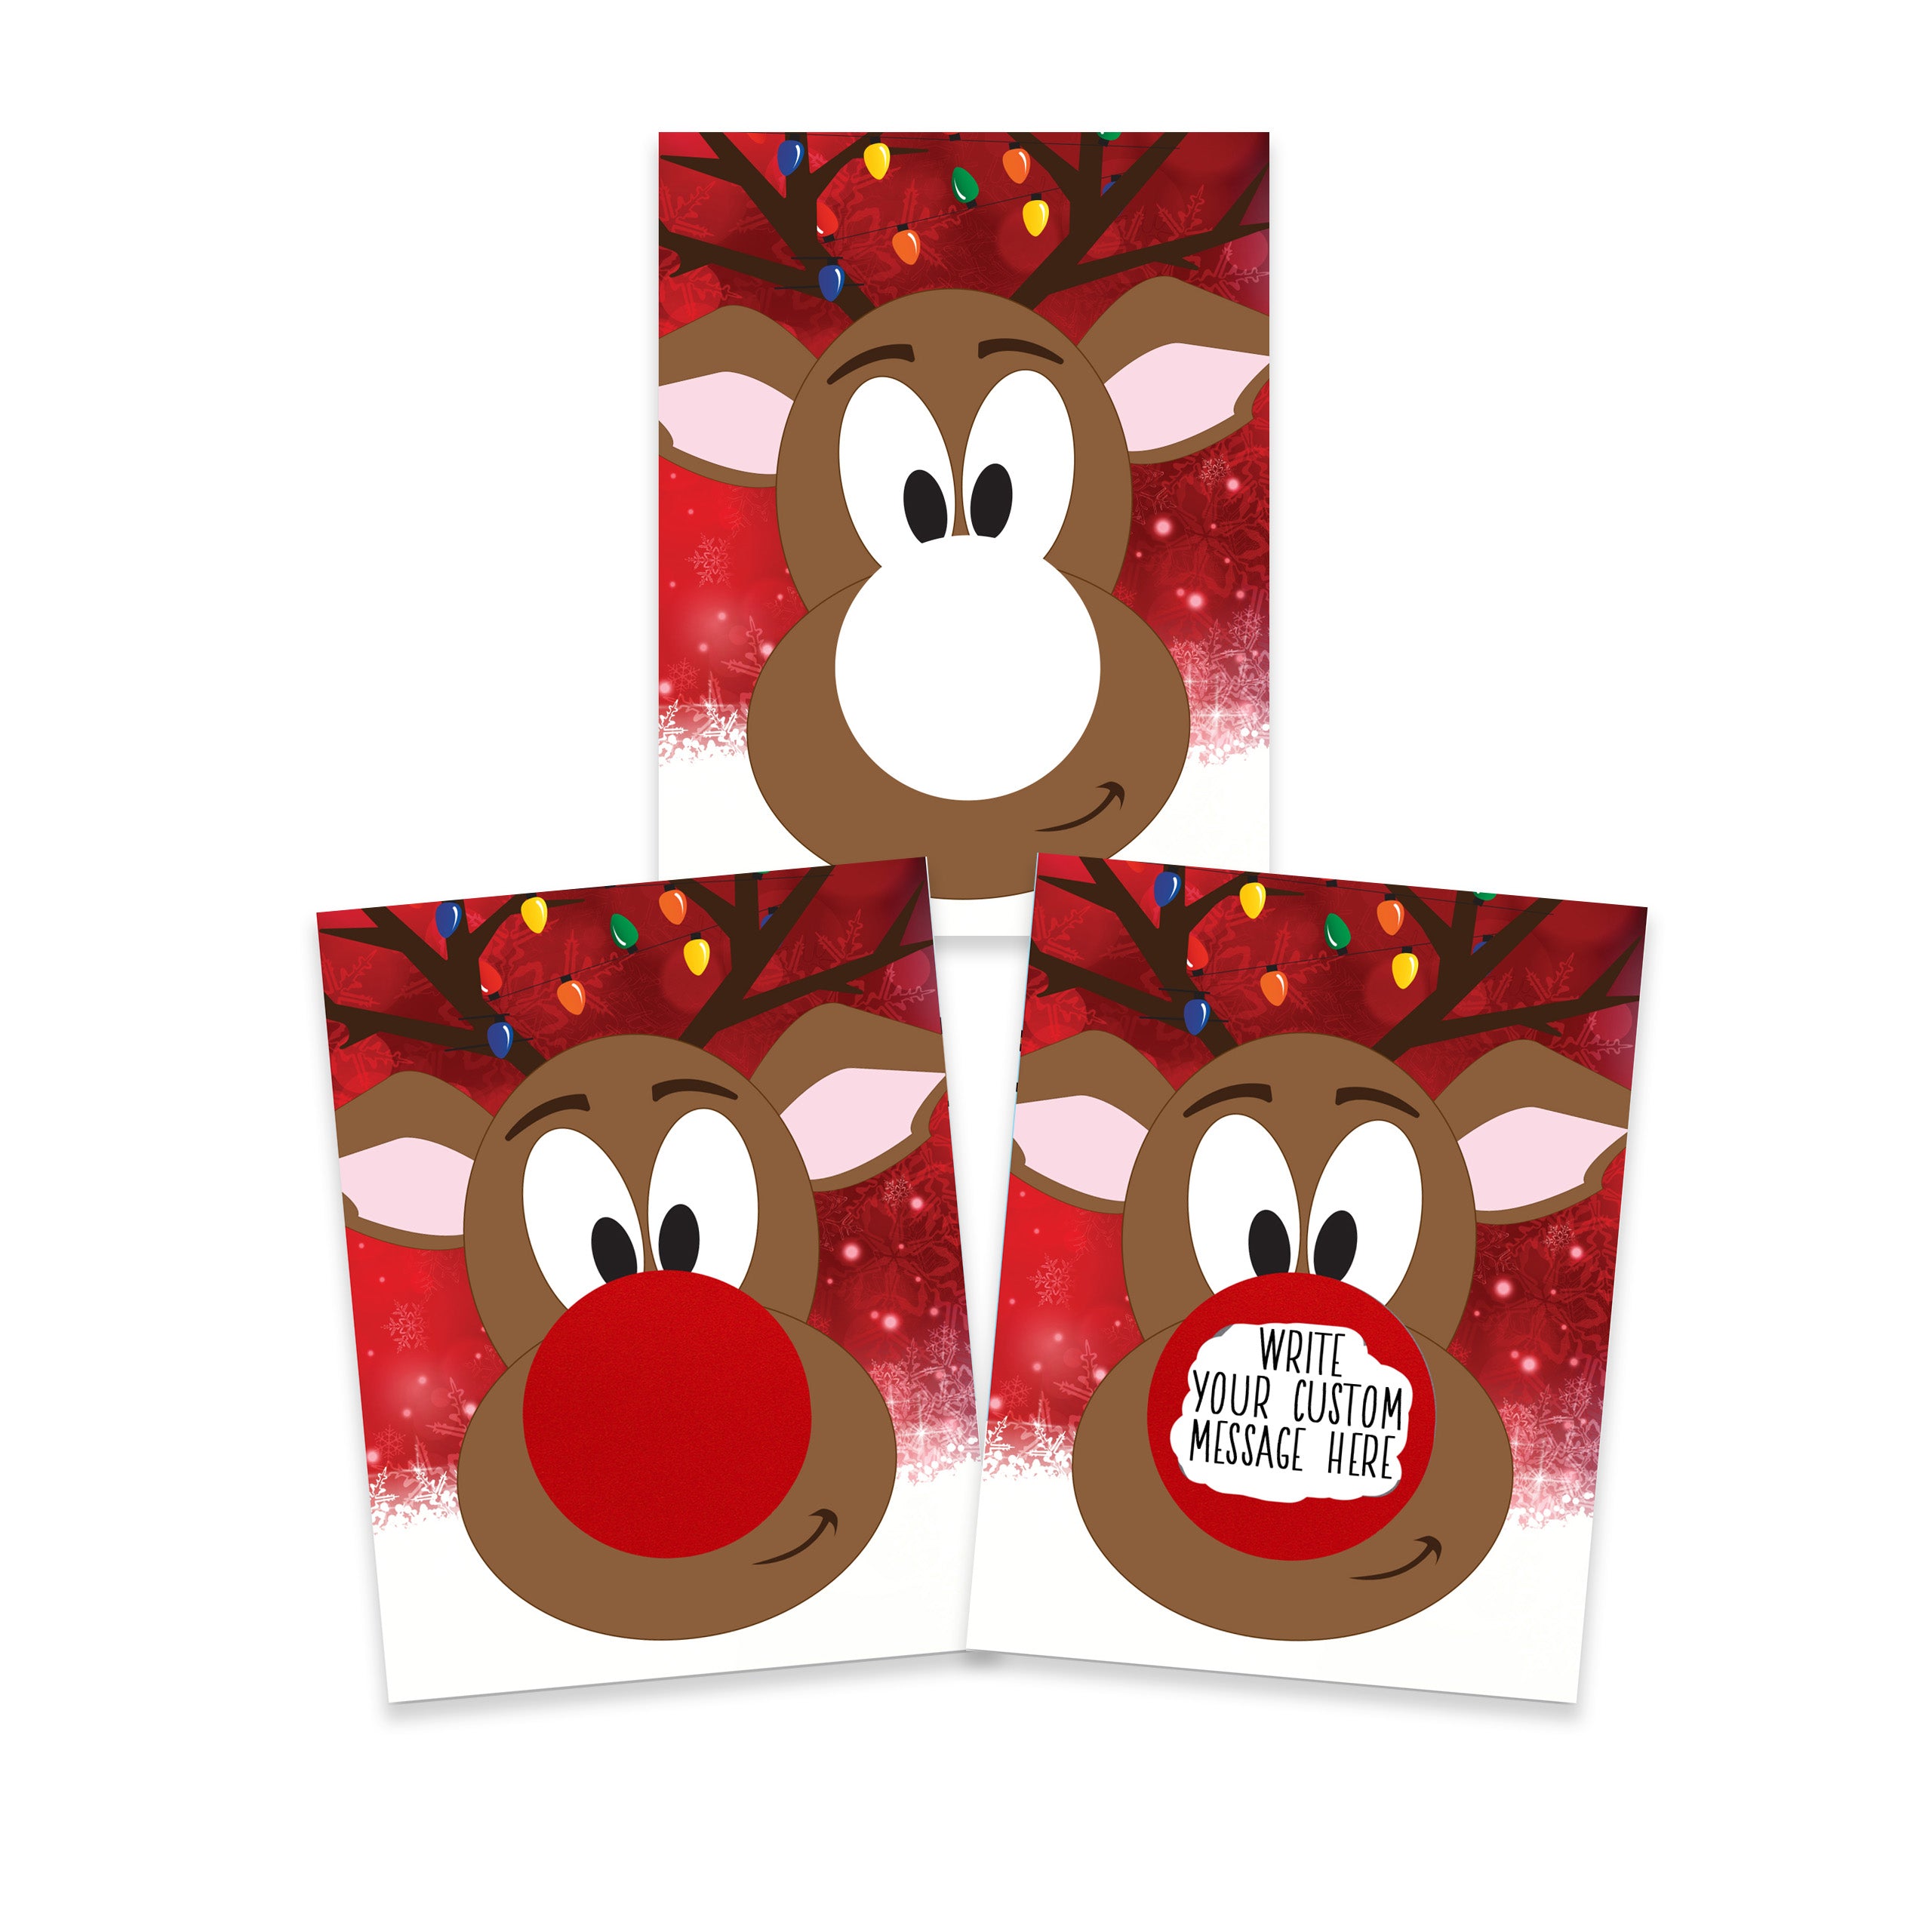 DIY Christmas Rudolph the Reindeer Make Your Own Scratch Offs - 20 Cards and 20 Scratch Off Stickers - My Scratch Offs